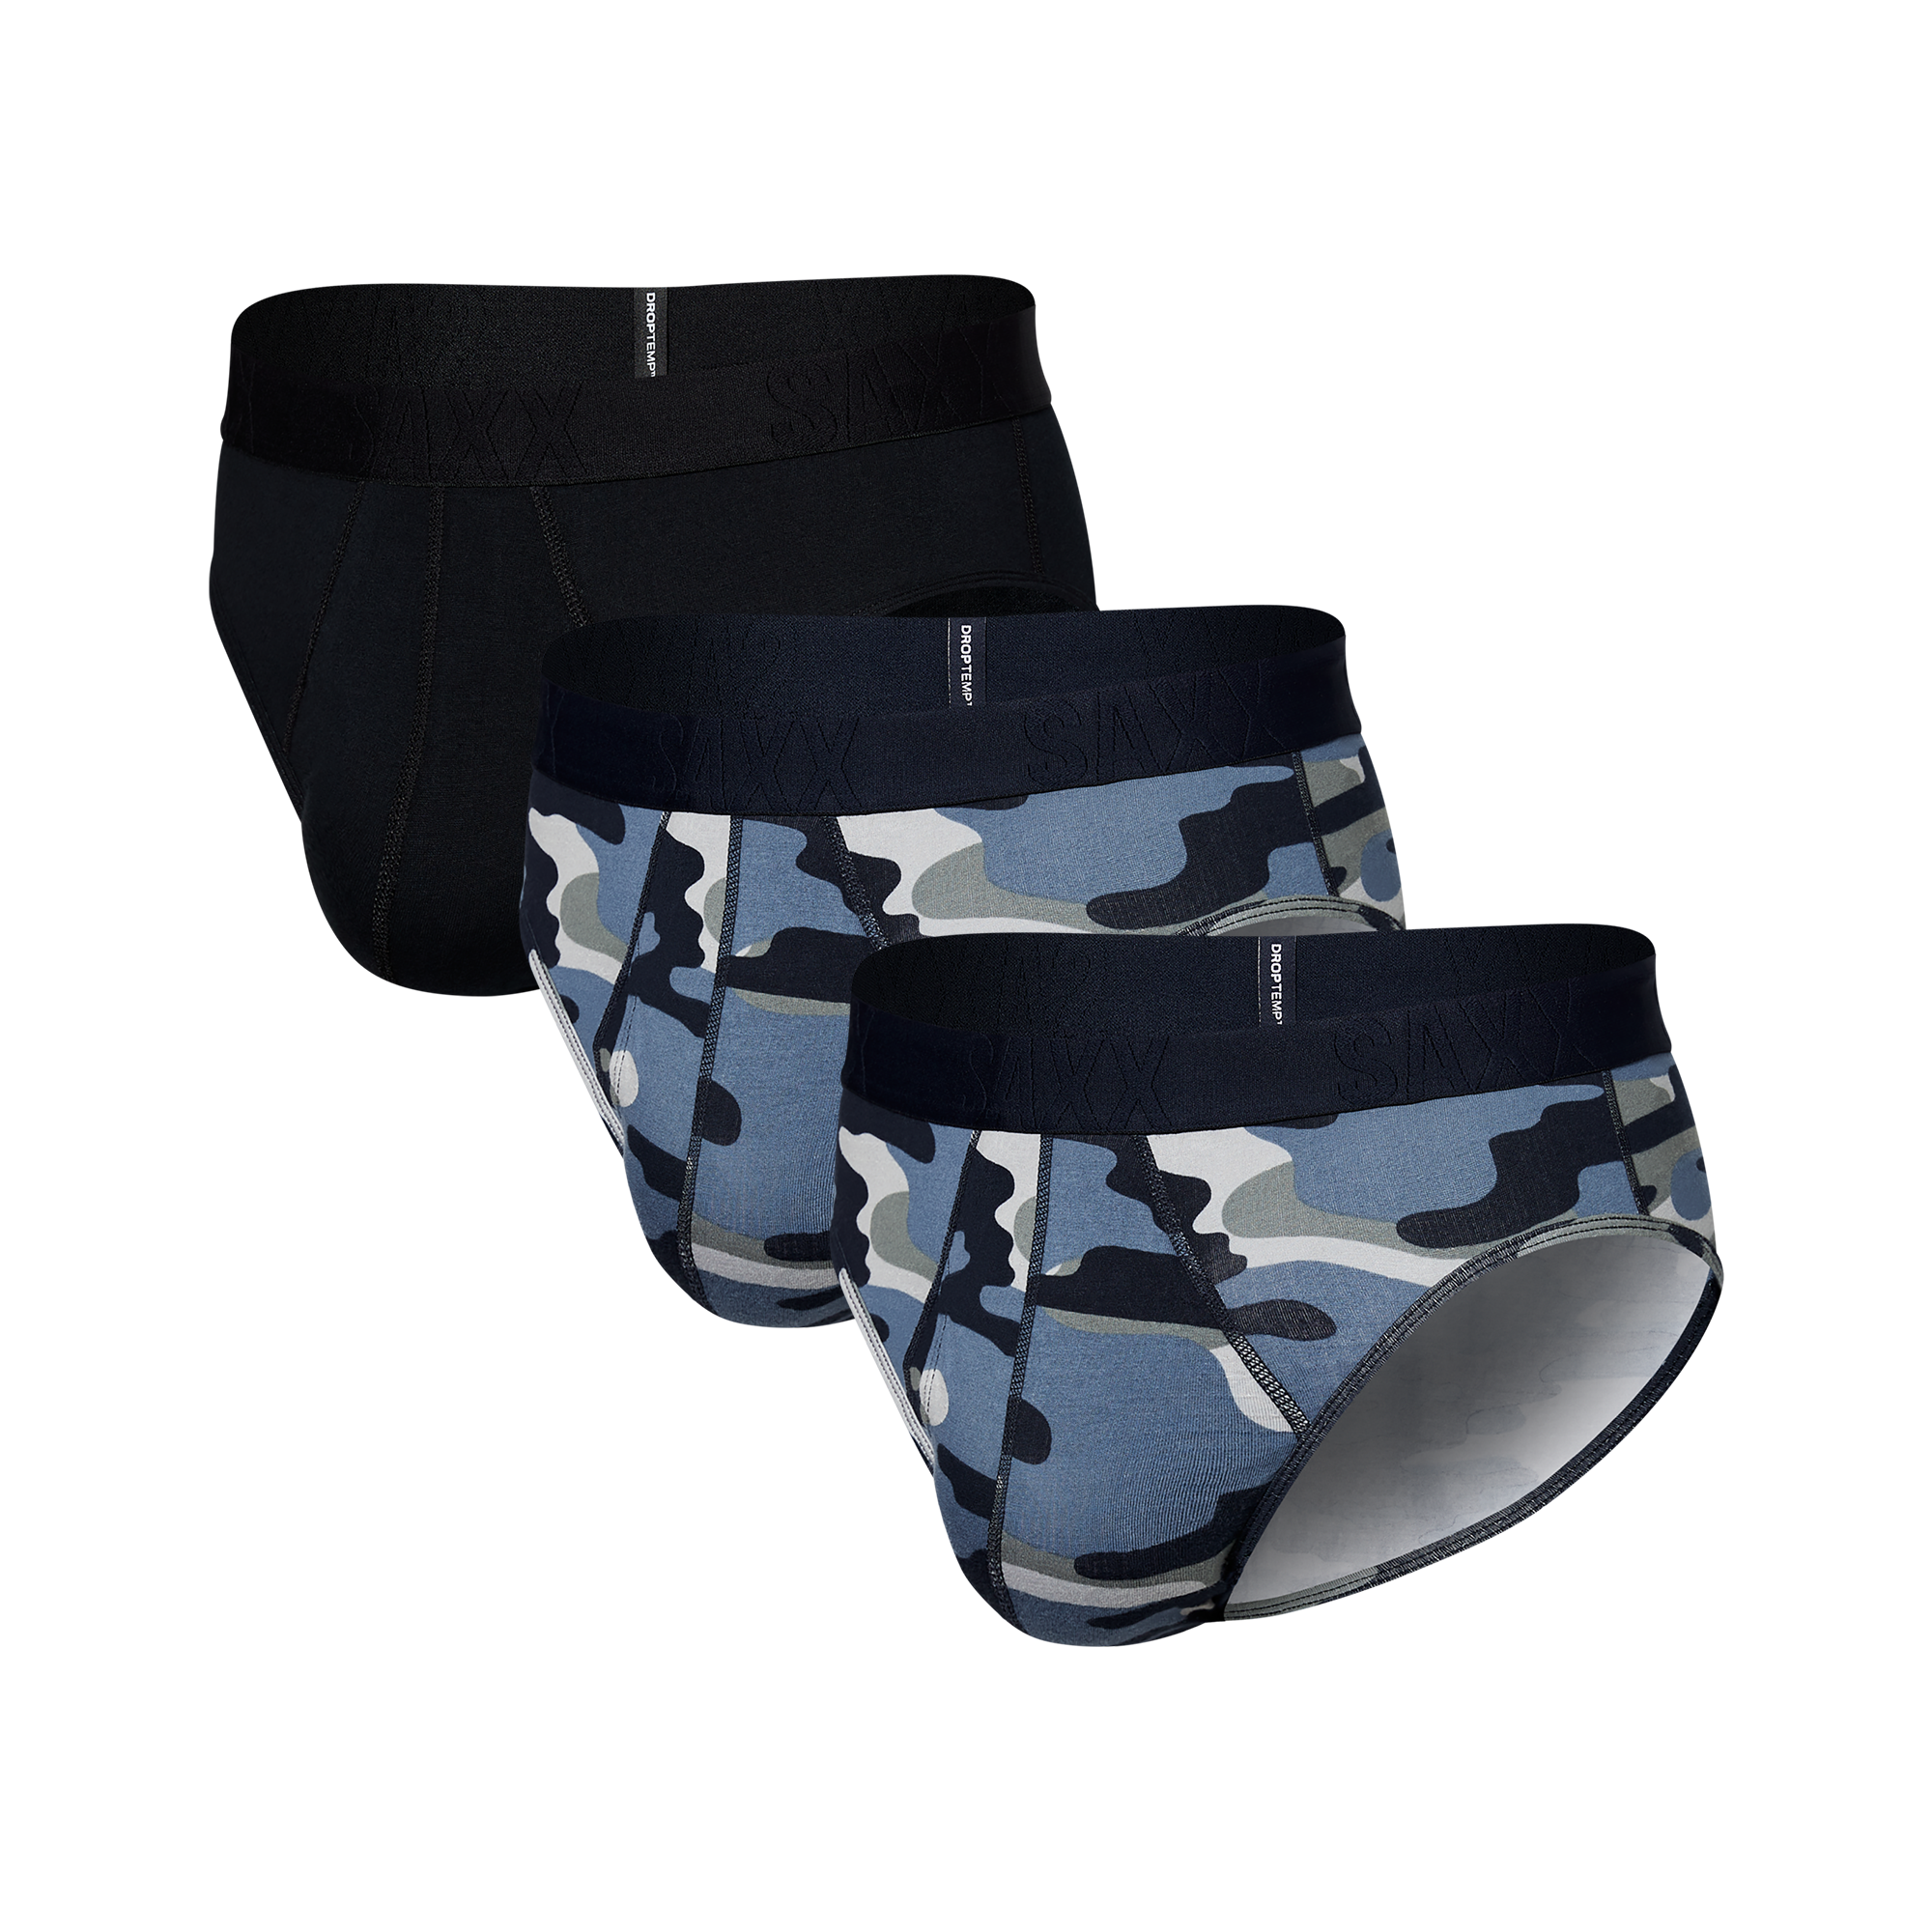 DropTemp Cooling Cotton Brief 3-Pack in Assorted Prints